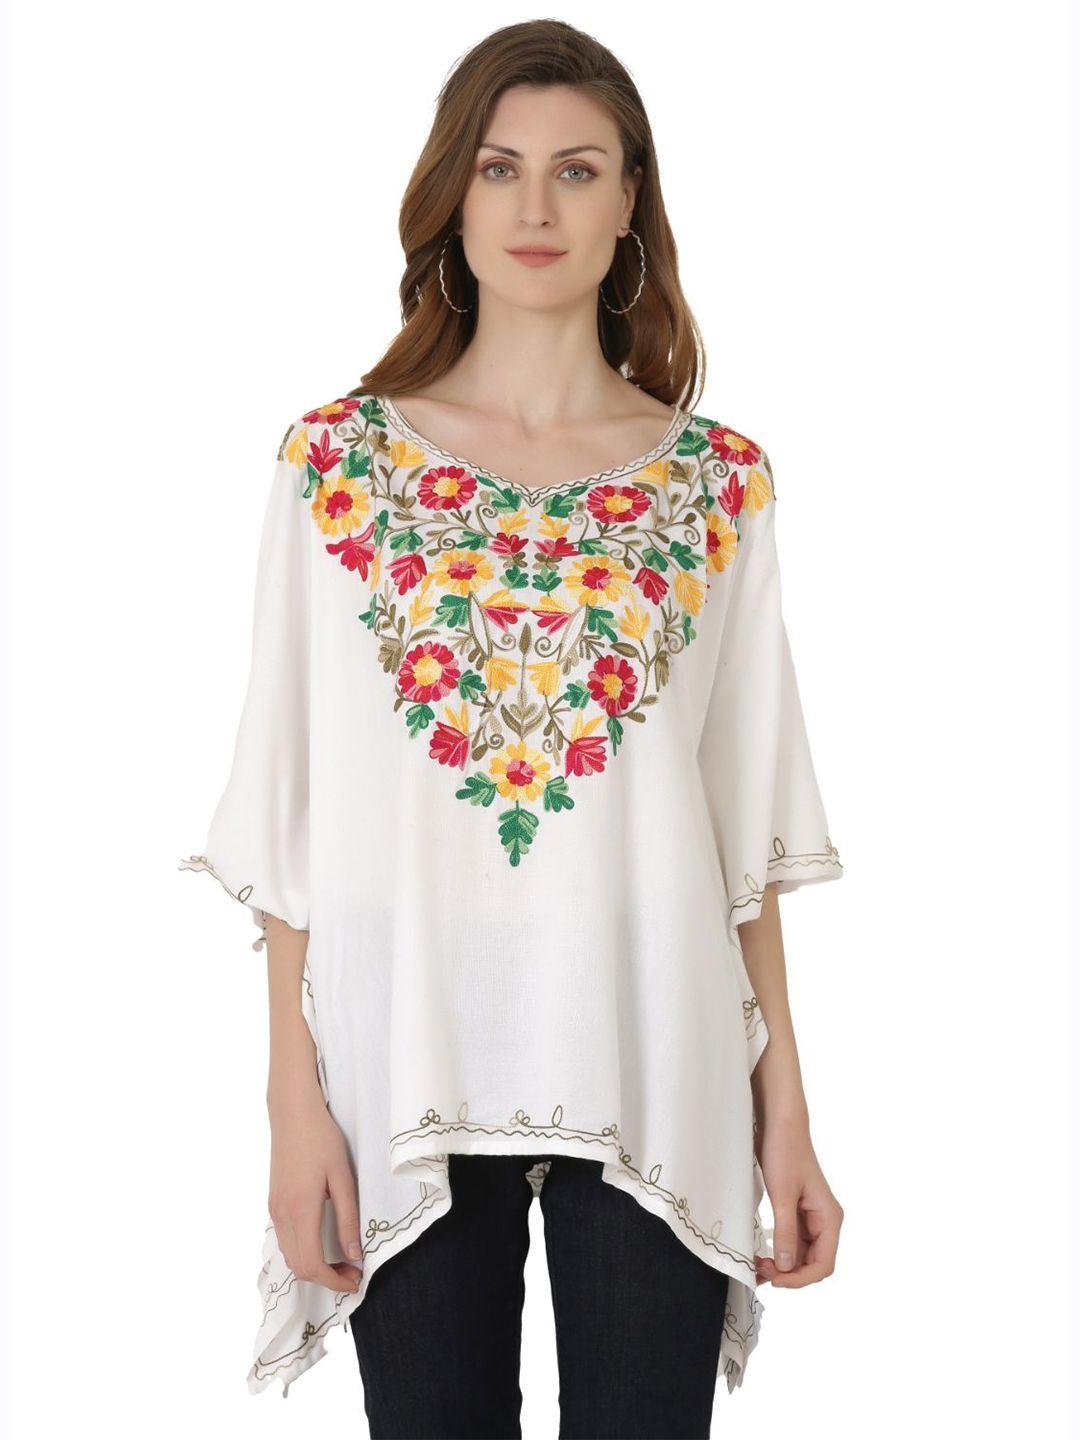 saakaa-off-white-floral-floral-embroidered-kaftan-top